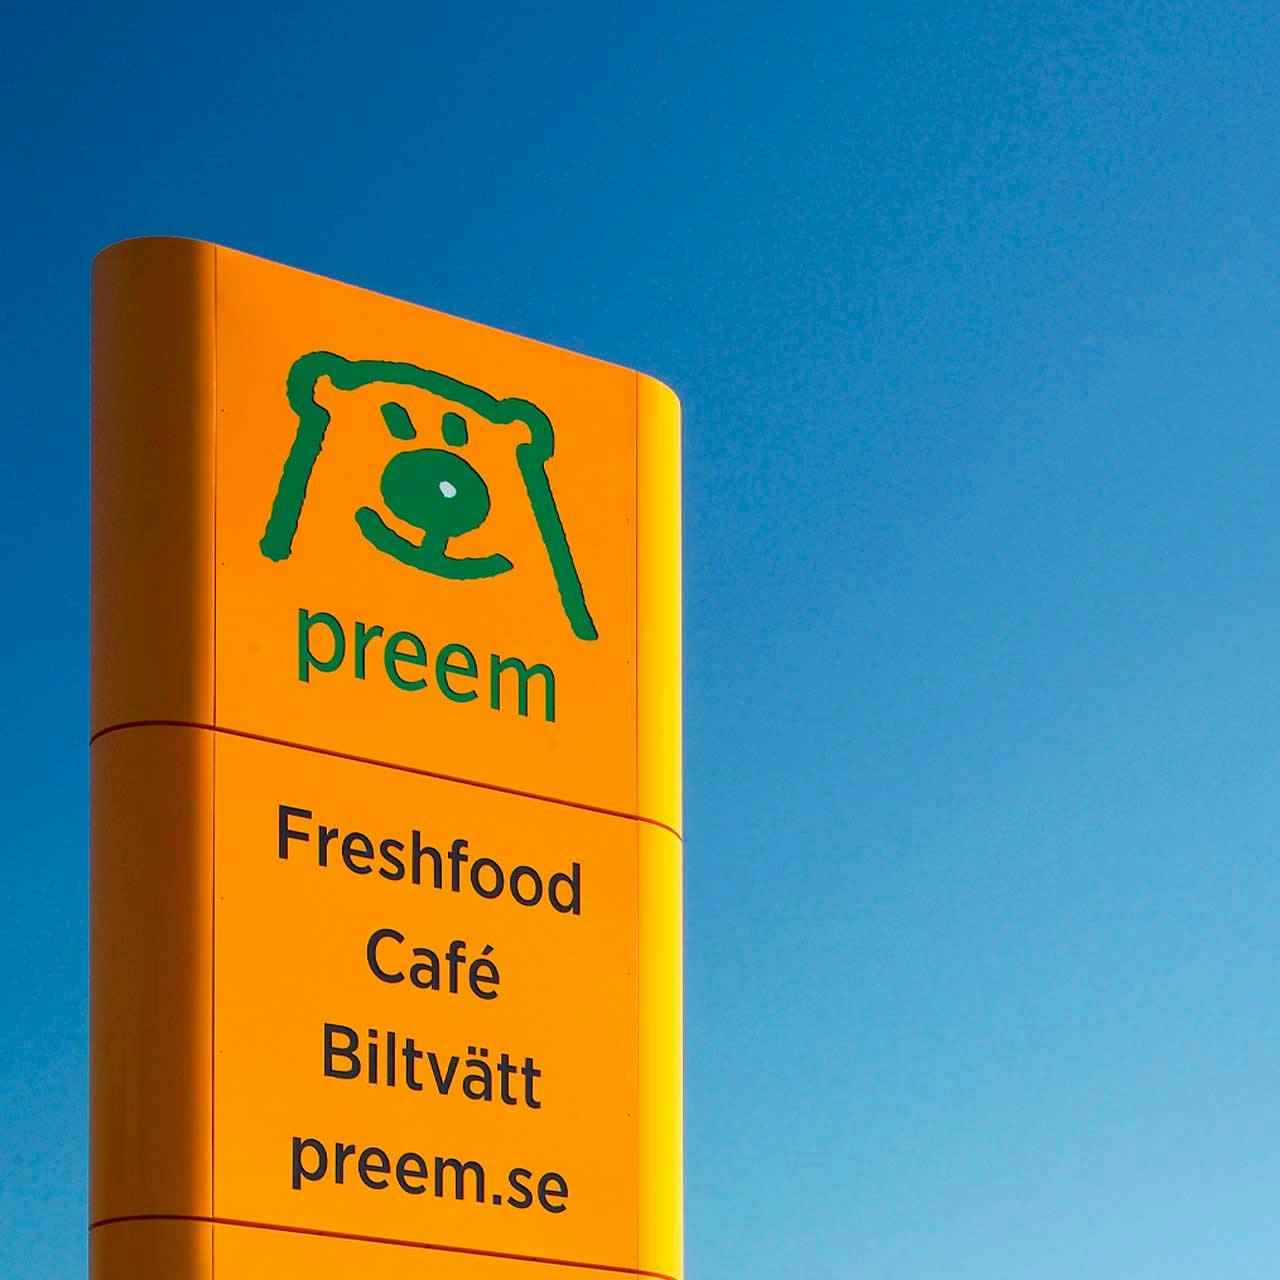 Preem's yellow sign against a blue sky